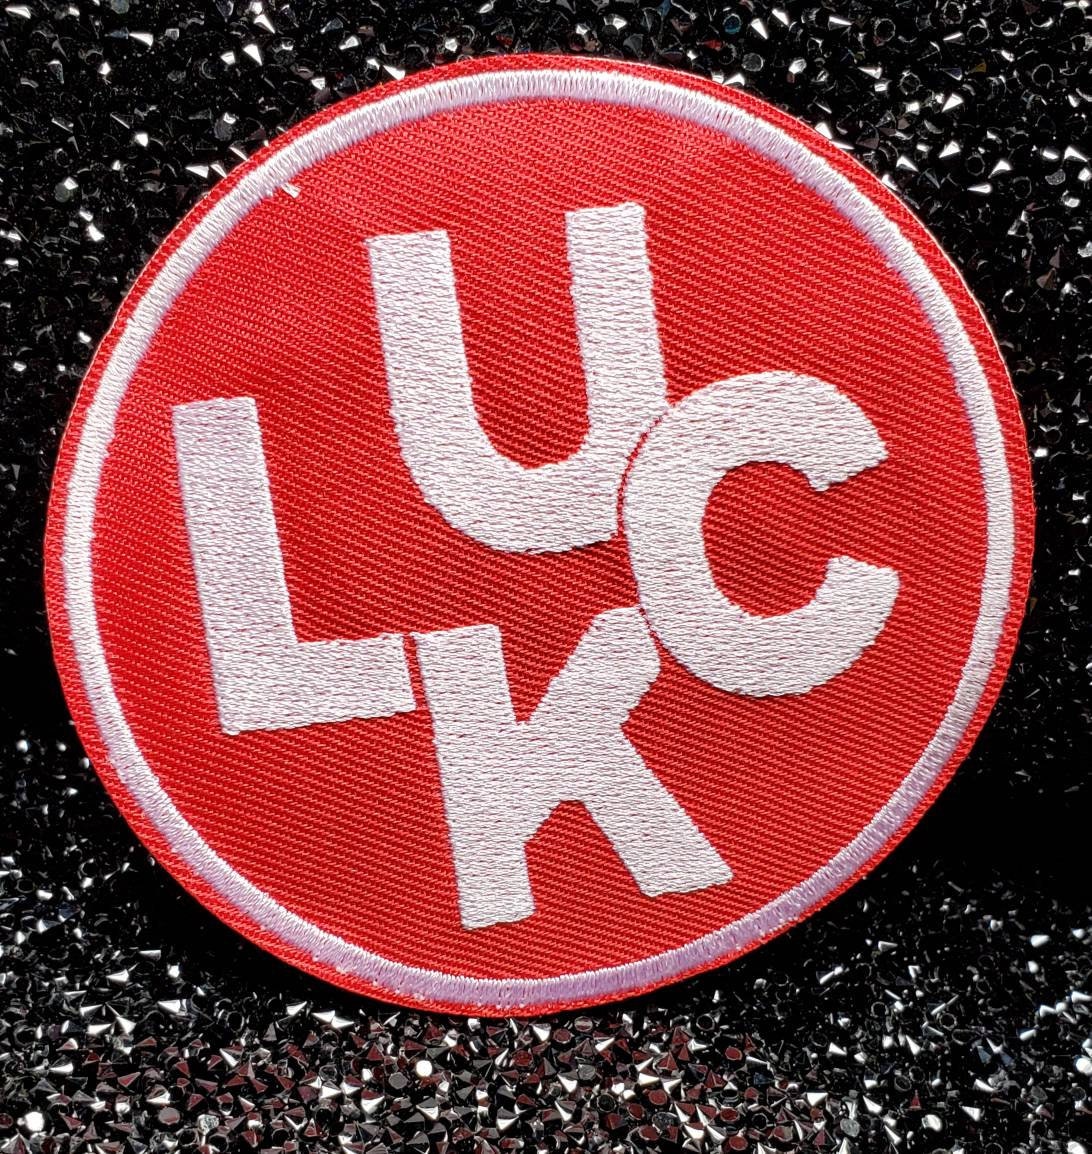 Red & White,"Luck" Circular Badge, Iron on Embroidered Patch, Positive Vibes Applique, Cool Patch for Clothing, Size 4"